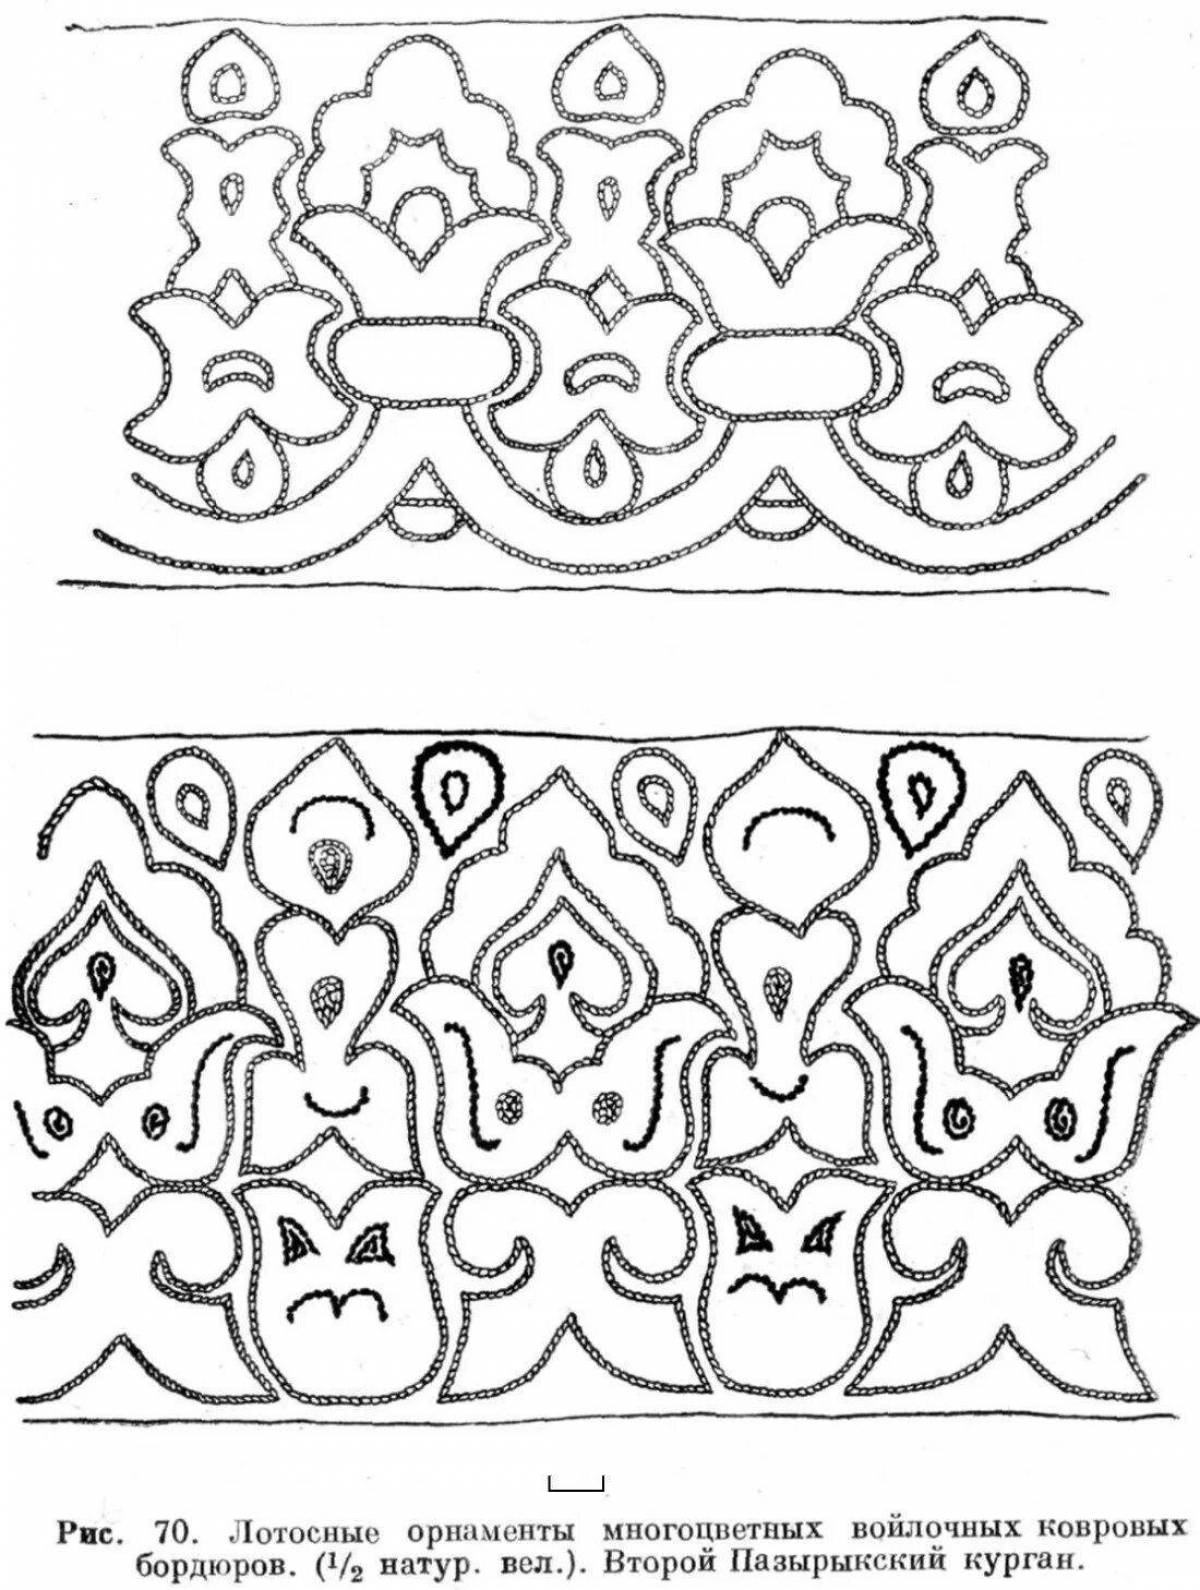 A fascinating coloring of the Tatar ornament for children